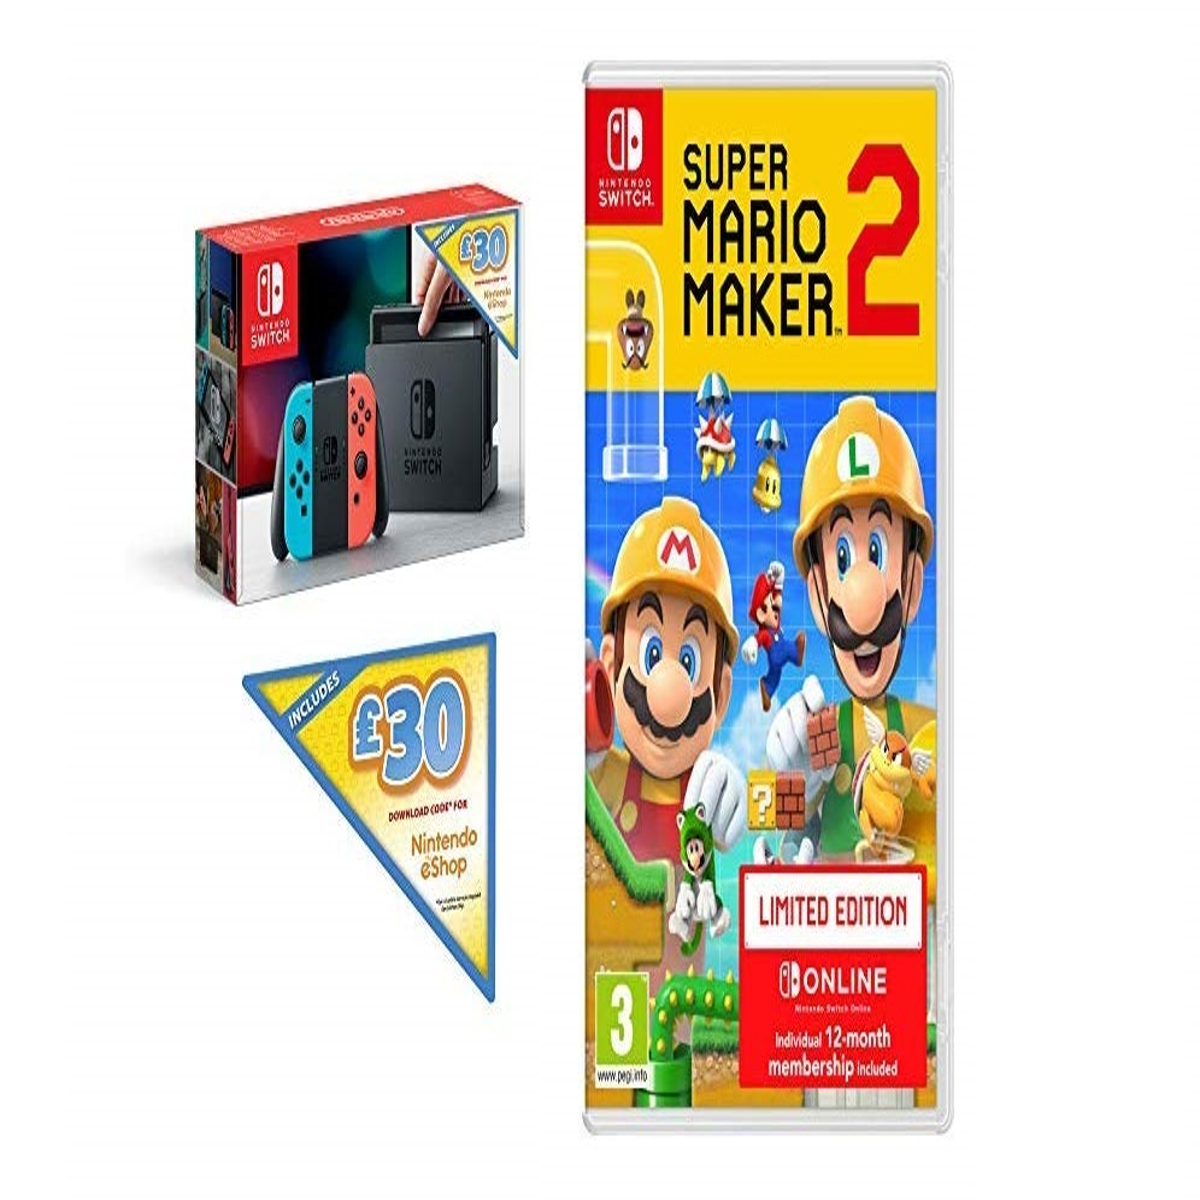 deal eShop just £30 £300 voucher a includes and Switch Maker 2, months\' Nintendo Mario for Online 12 This Switch